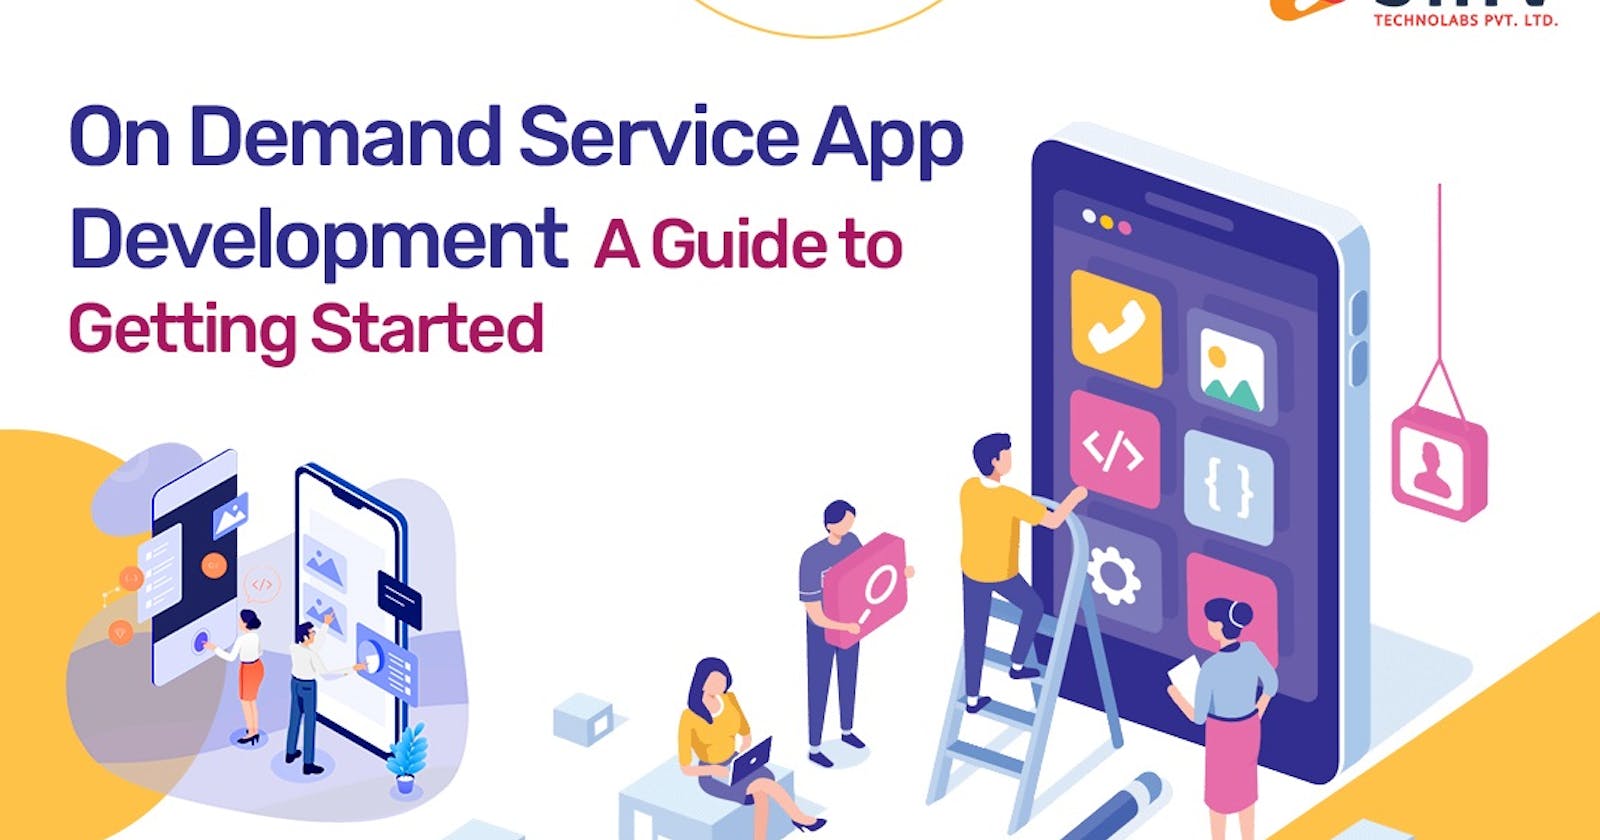 On Demand Service App Development: A Guide to Getting Started